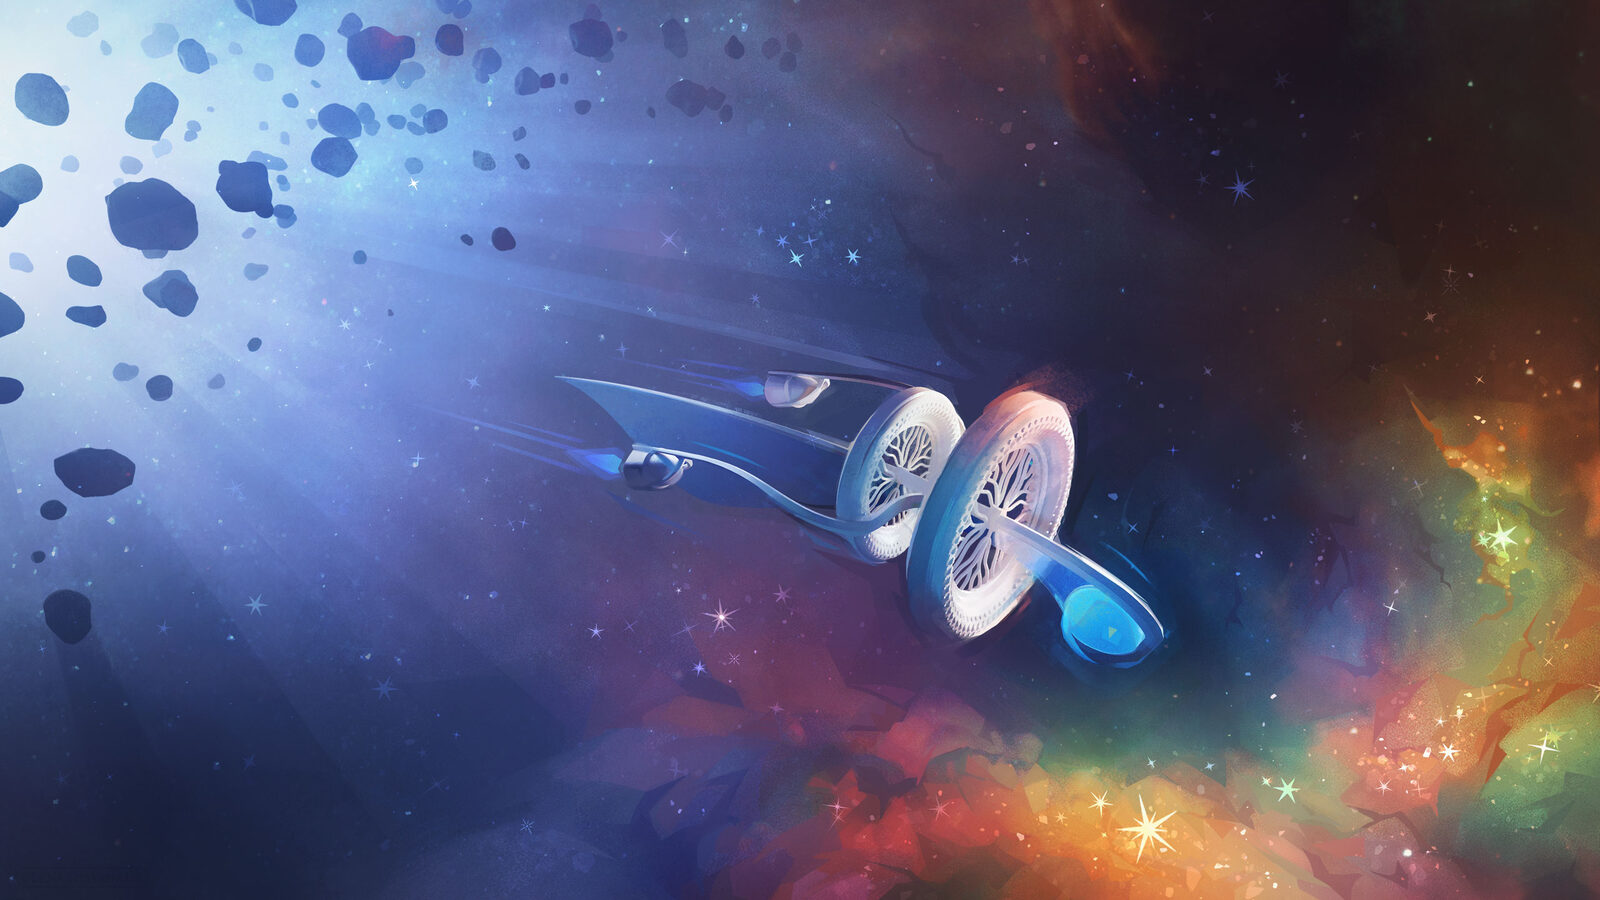 Conceptual illustration of a generation ship flying through space